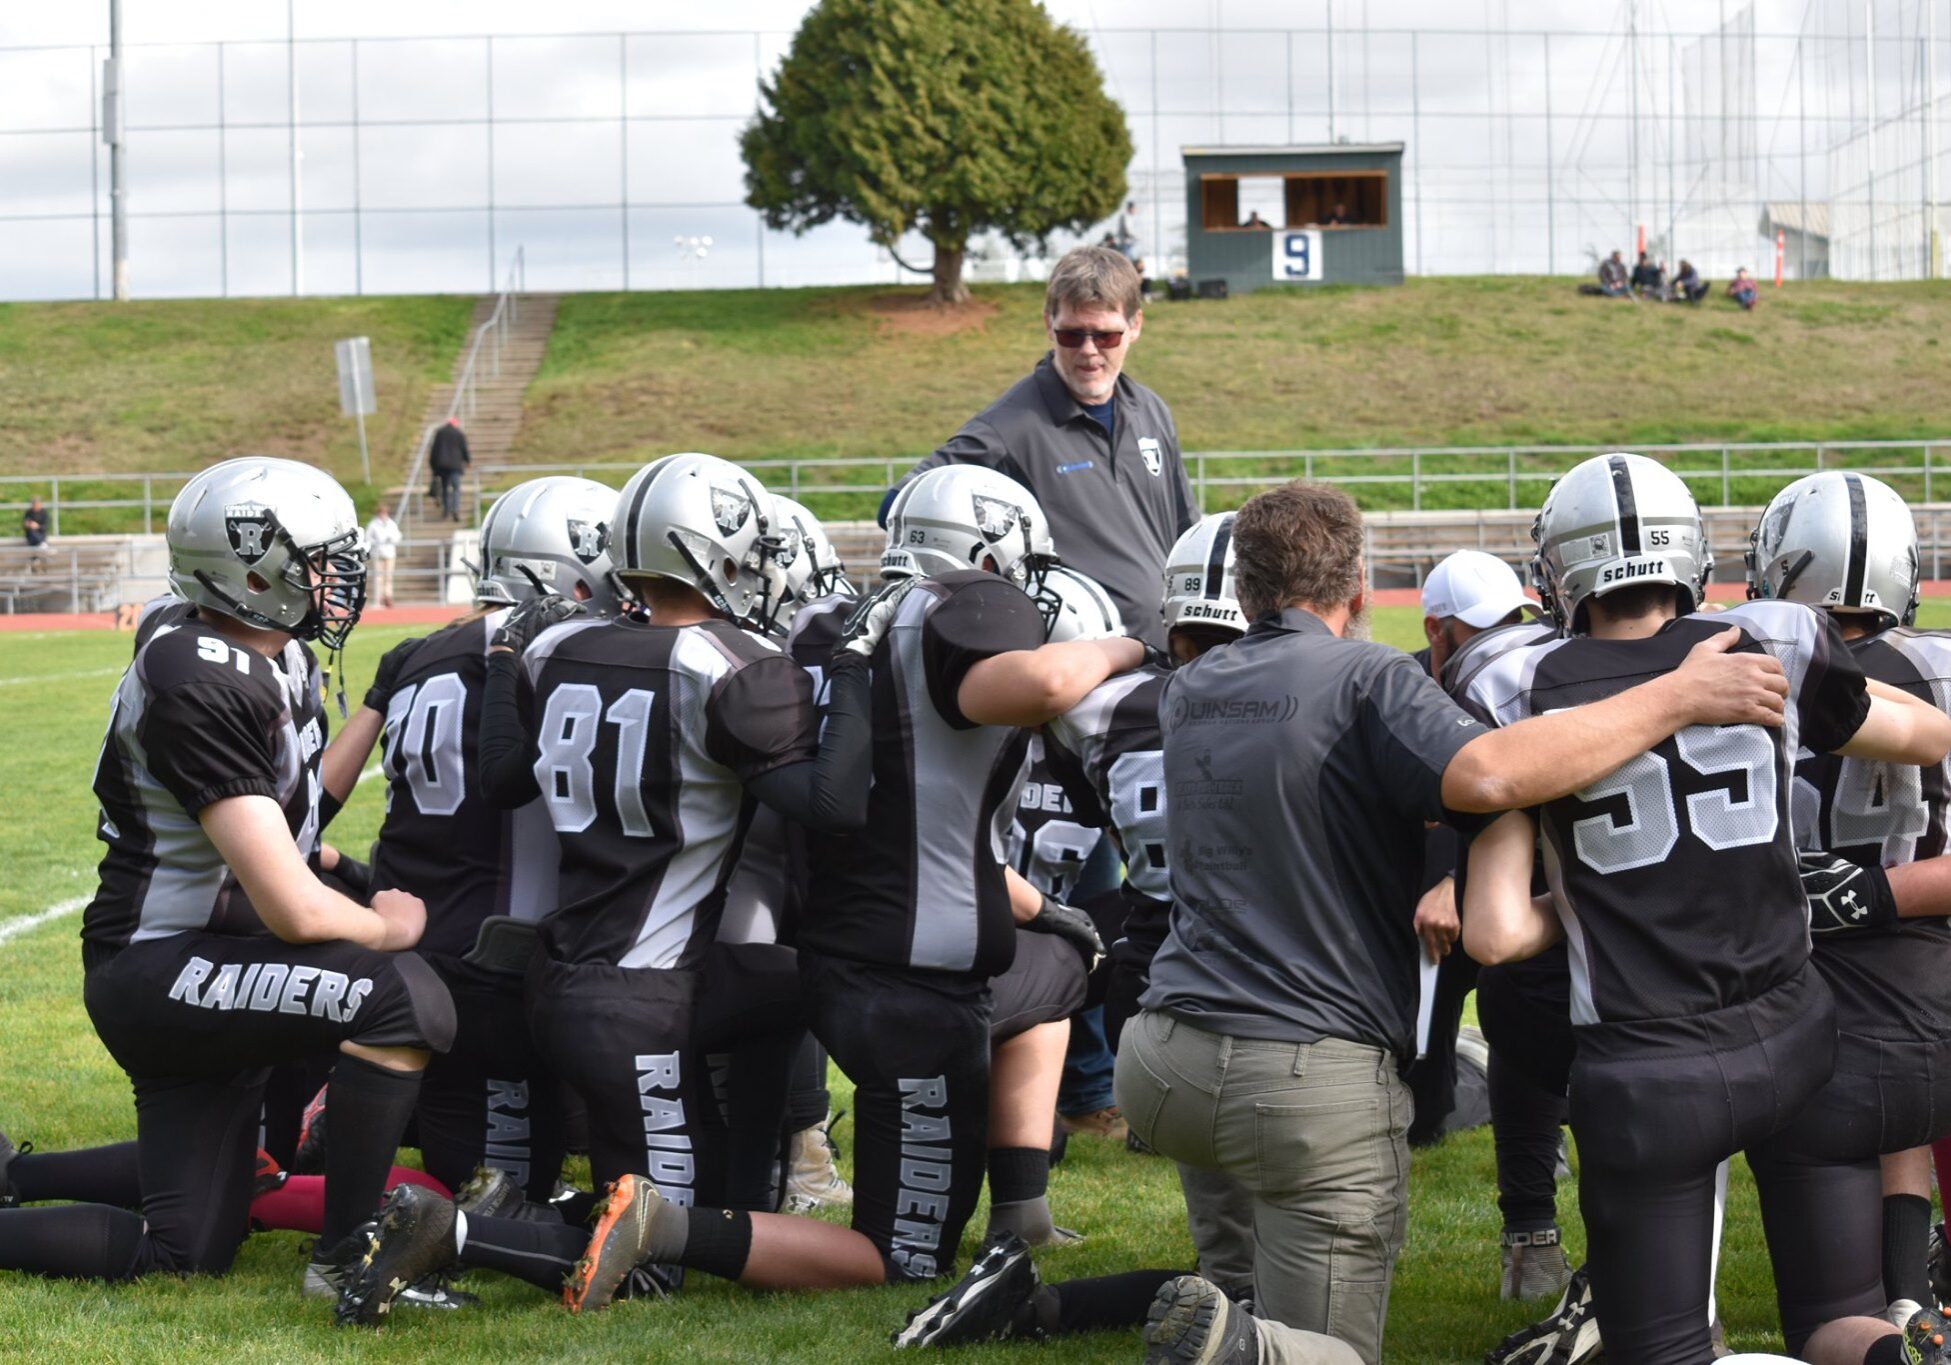 Fall Tackle (Ages 12-18): Registration for August - November Program Open in June